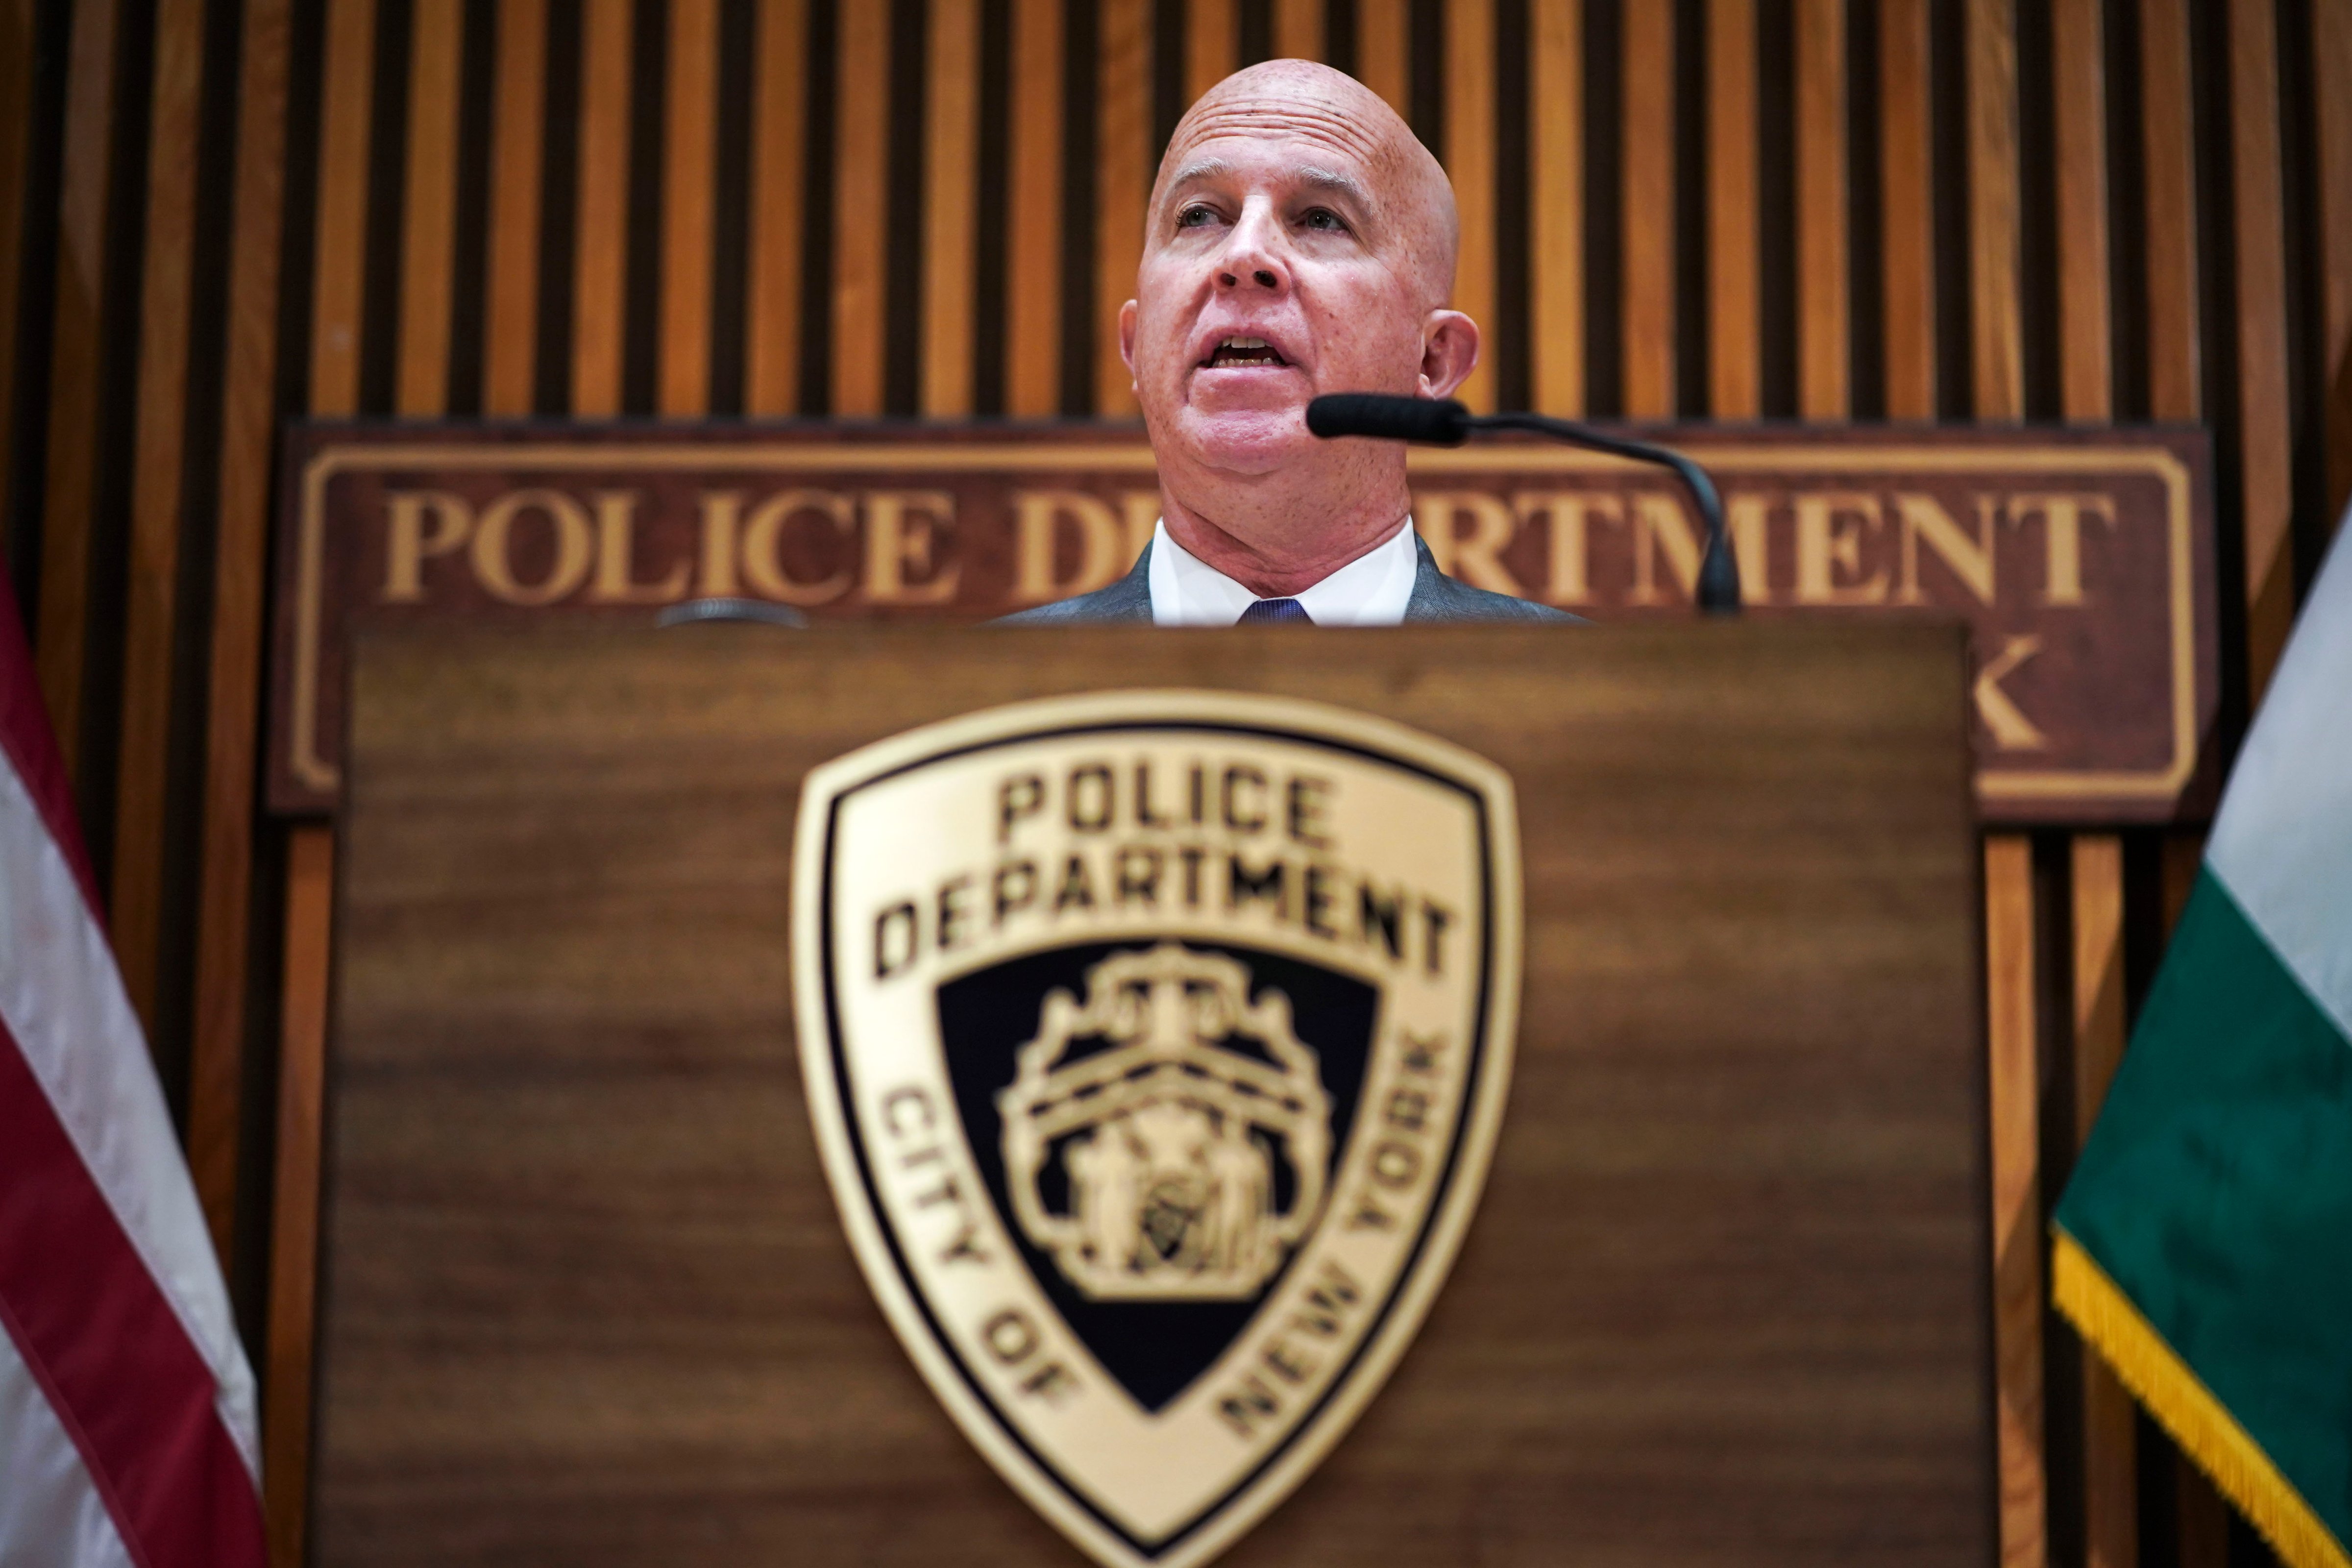 New York City Police Commissioner James O'Neill speaks during a press conference to announce the termination of officer Daniel Pantaleo on August 19, 2019 in New York City. (Drew Angerer—Getty Images)